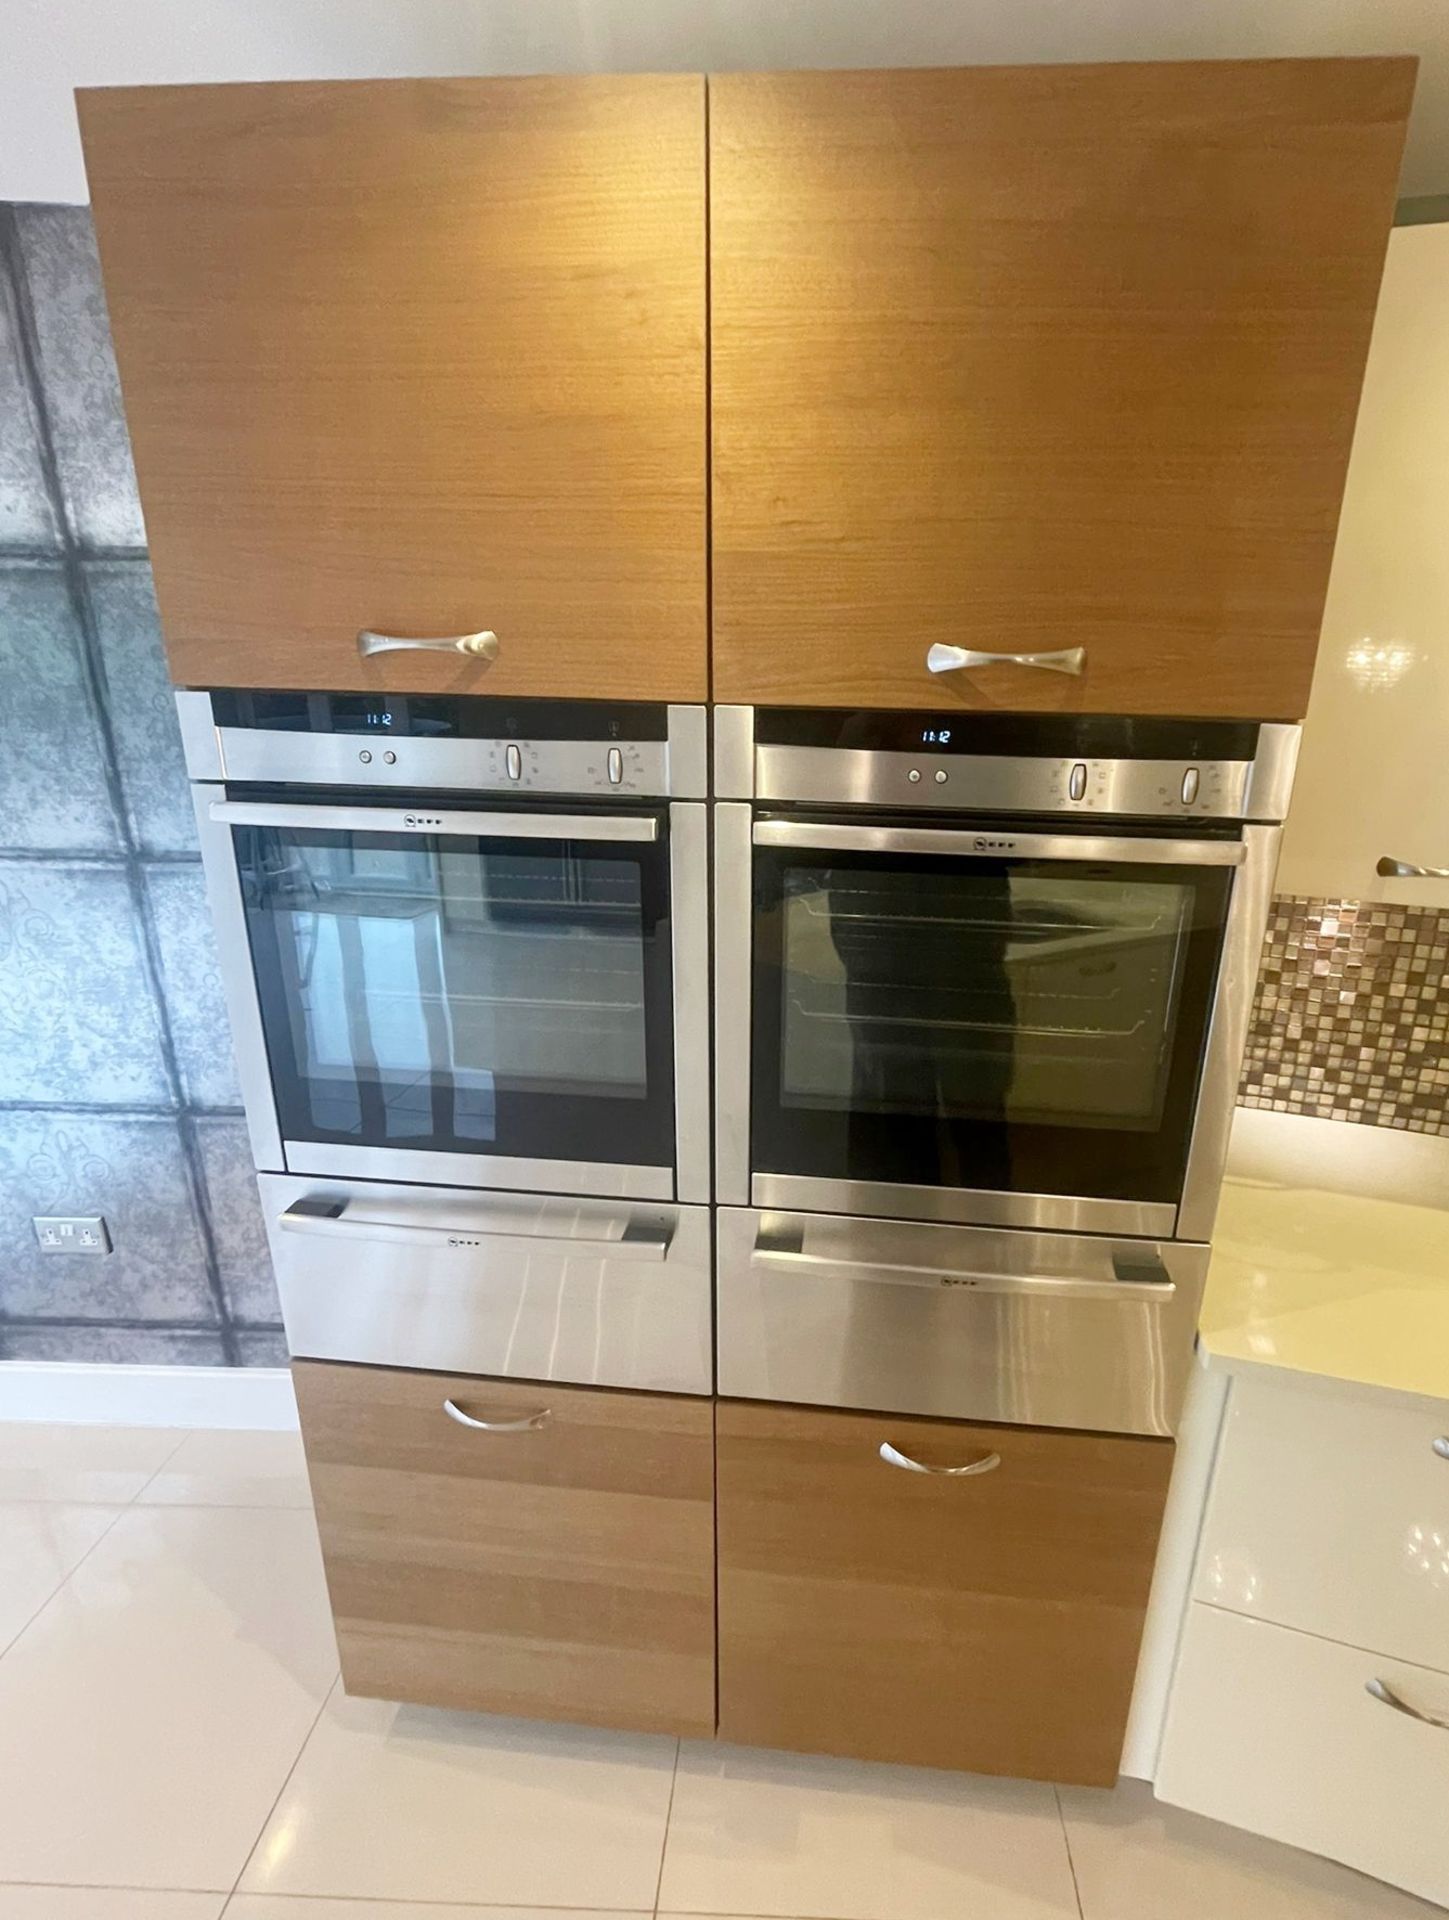 1 x Contemporary ALNO Fitted Kitchen With Branded  Appliances Created By Award Winning Kitchen - Image 58 of 89